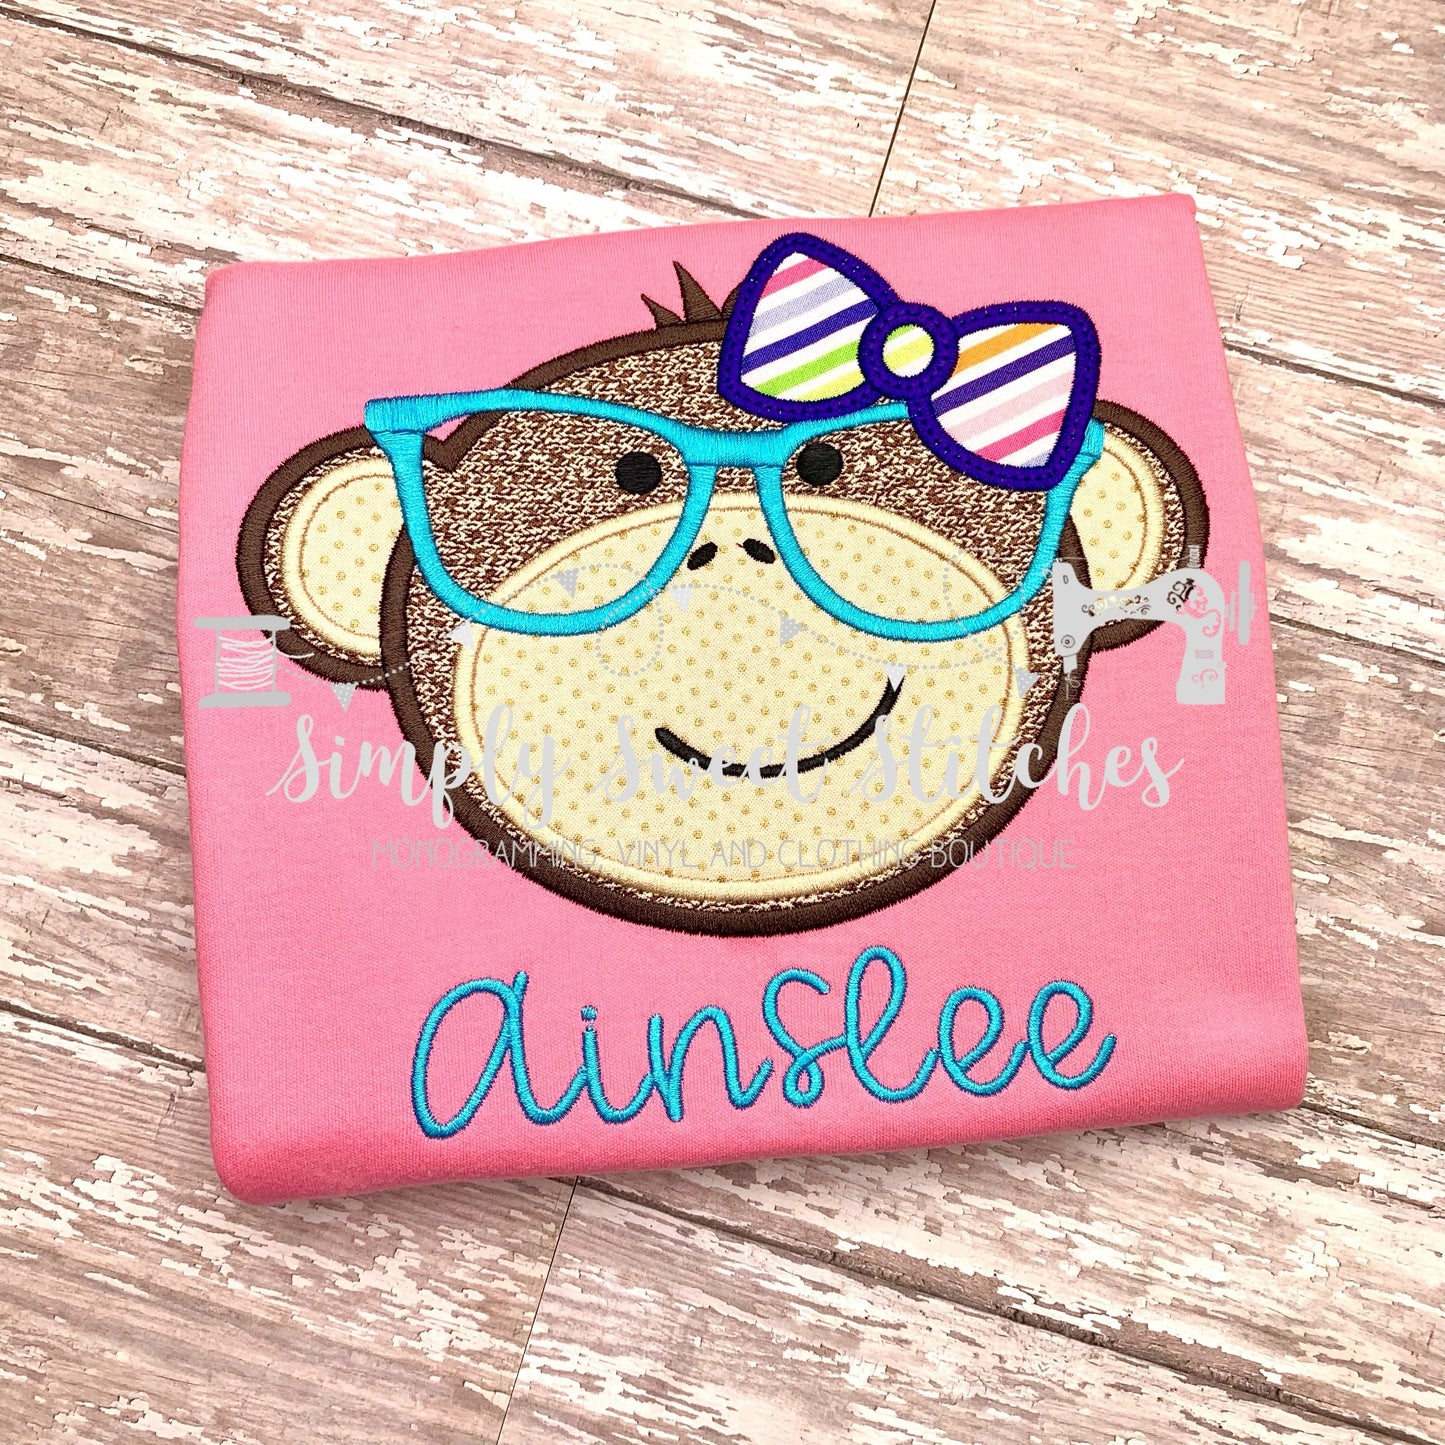 1017 - GIRLY MONKEY WITH GLASSES - APPLIQUE CHILD SHIRT